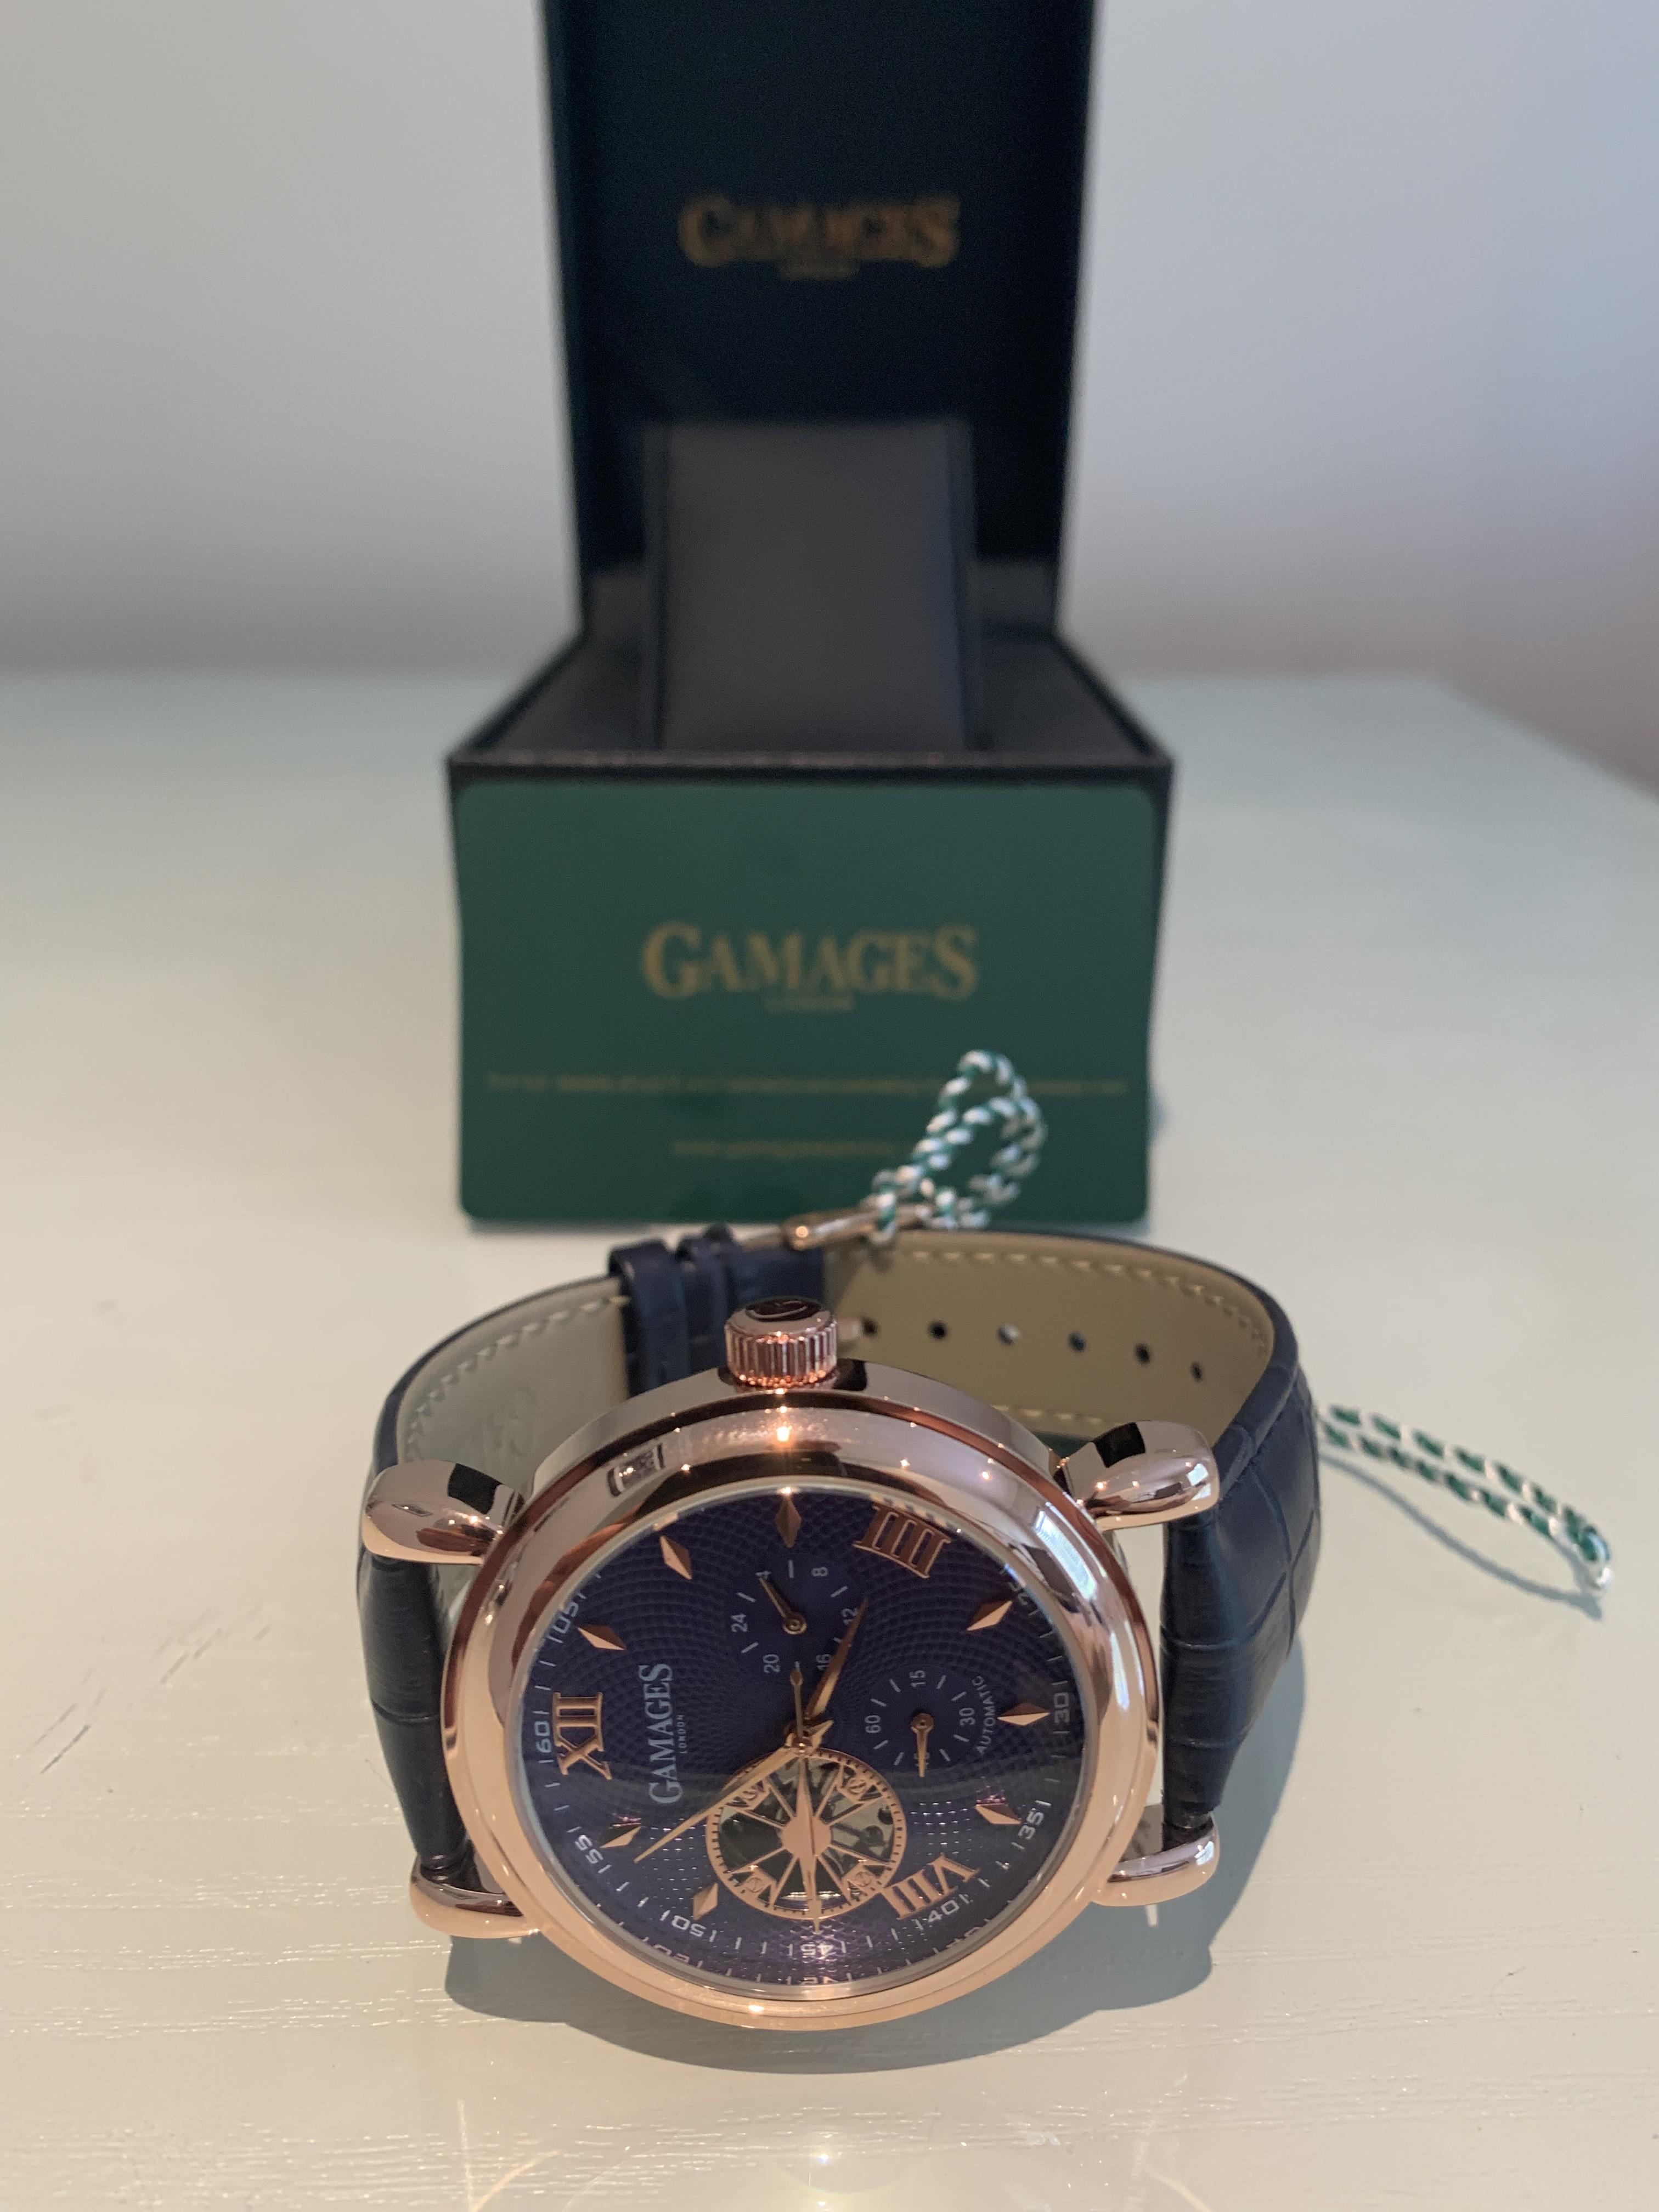 Limited Edition Hand Assembled GAMAGES Hour Timer Automatic Rose – 5 Year Warranty & Free Delivery - Image 2 of 5